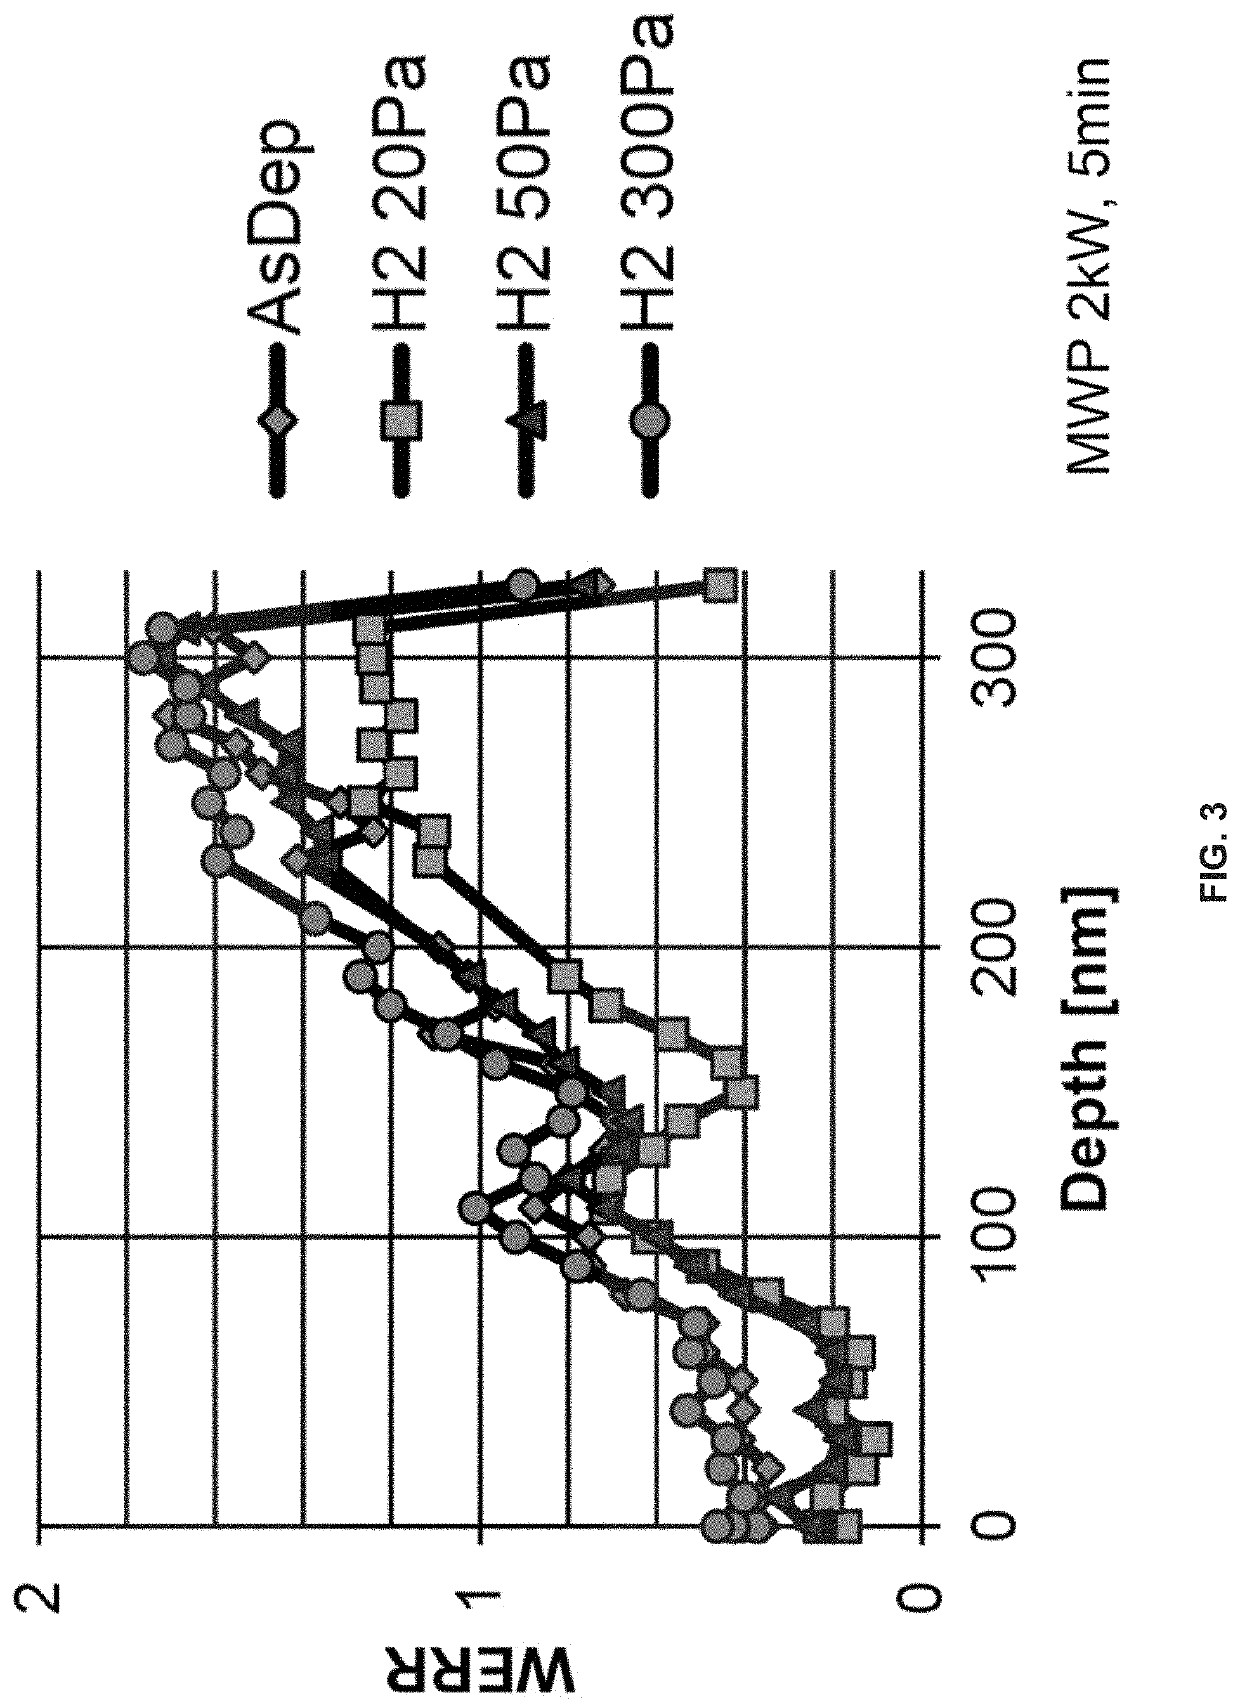 Method of forming an electronic structure using reforming gas, system for performing the method, and structure formed using the method